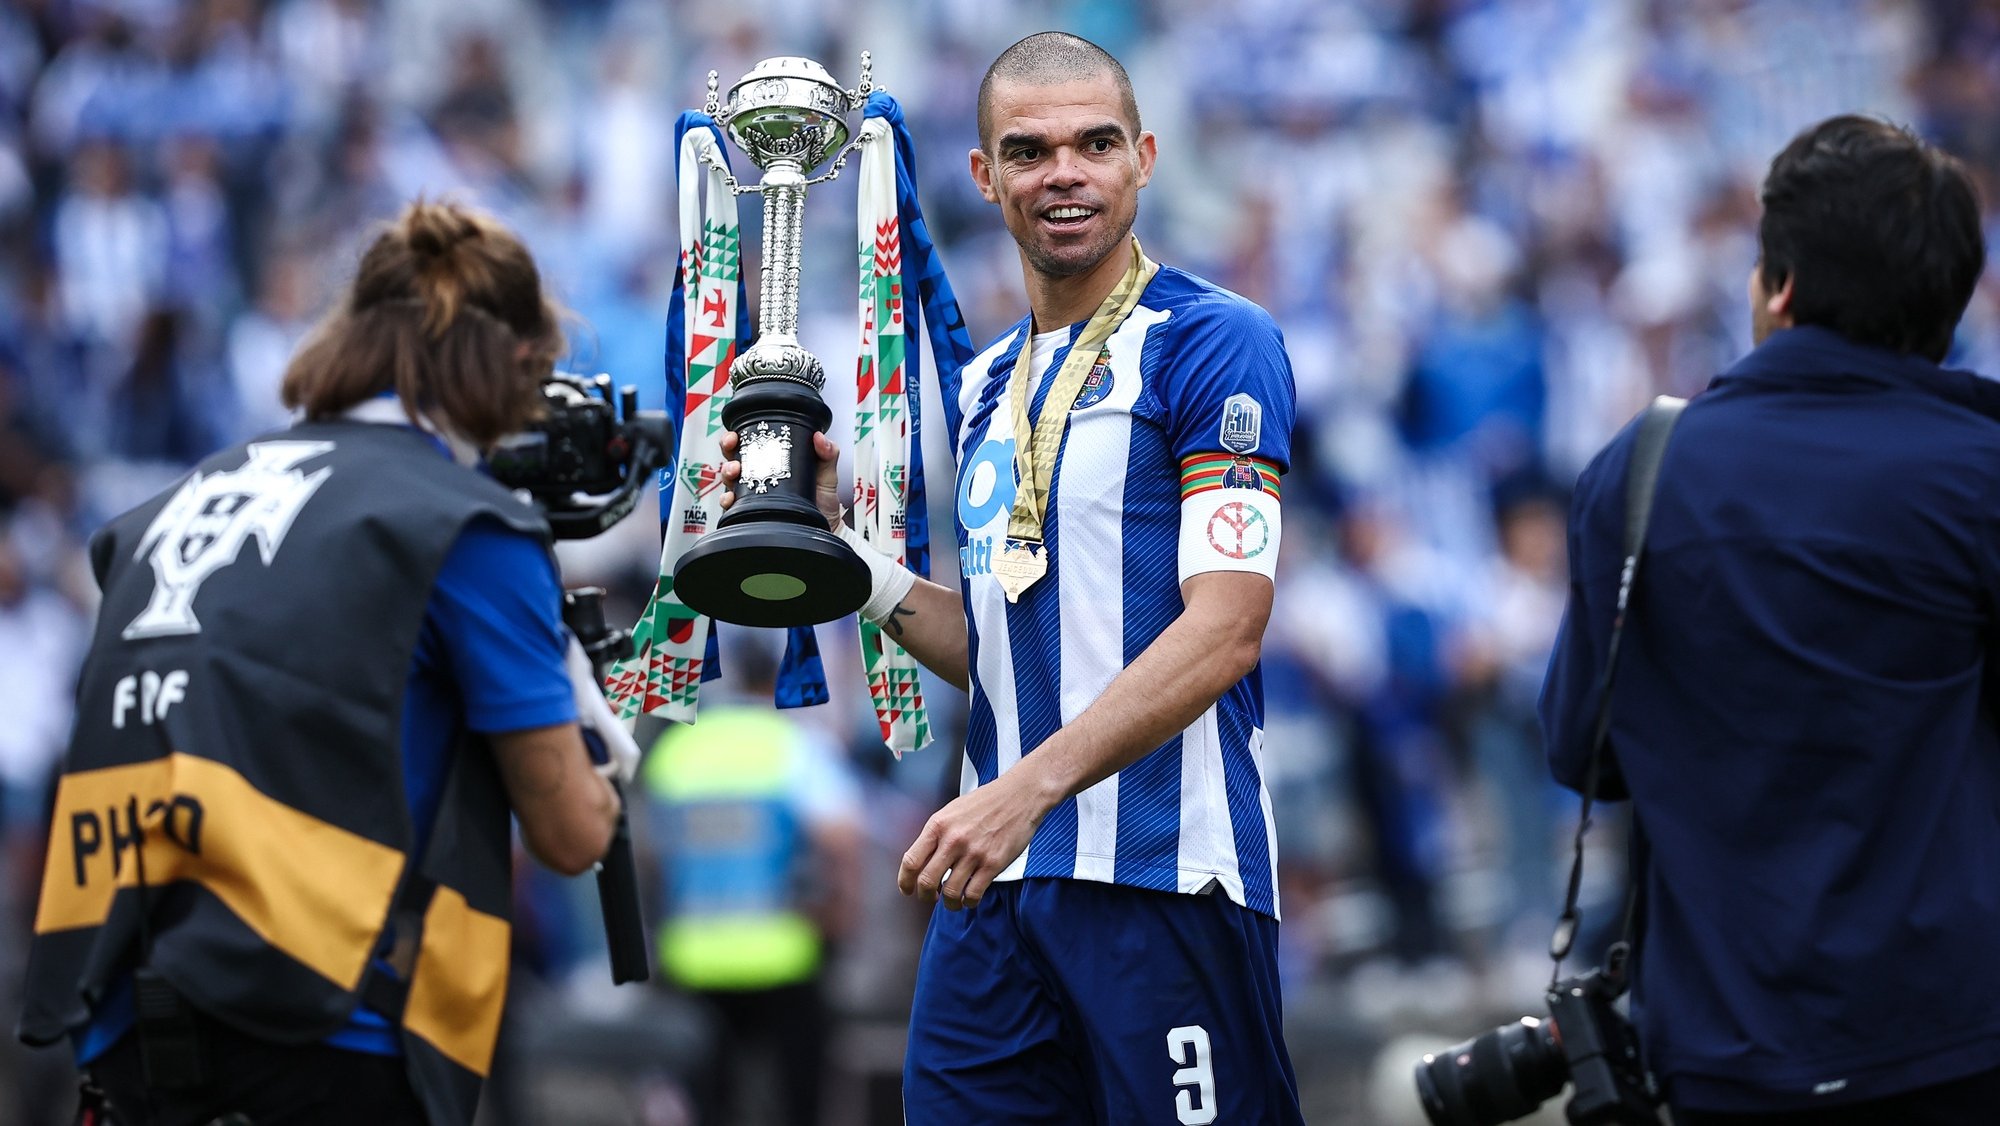 FC Porto&#039;s Pepe pose with the trophy after winning the Portuguese Cup final soccer match against CD Tondela at Jamor National stadium in Oeiras, outskirts of Lisbon, Portugal, 22 May 2022. RODRIGO ANTUNES/LUSA